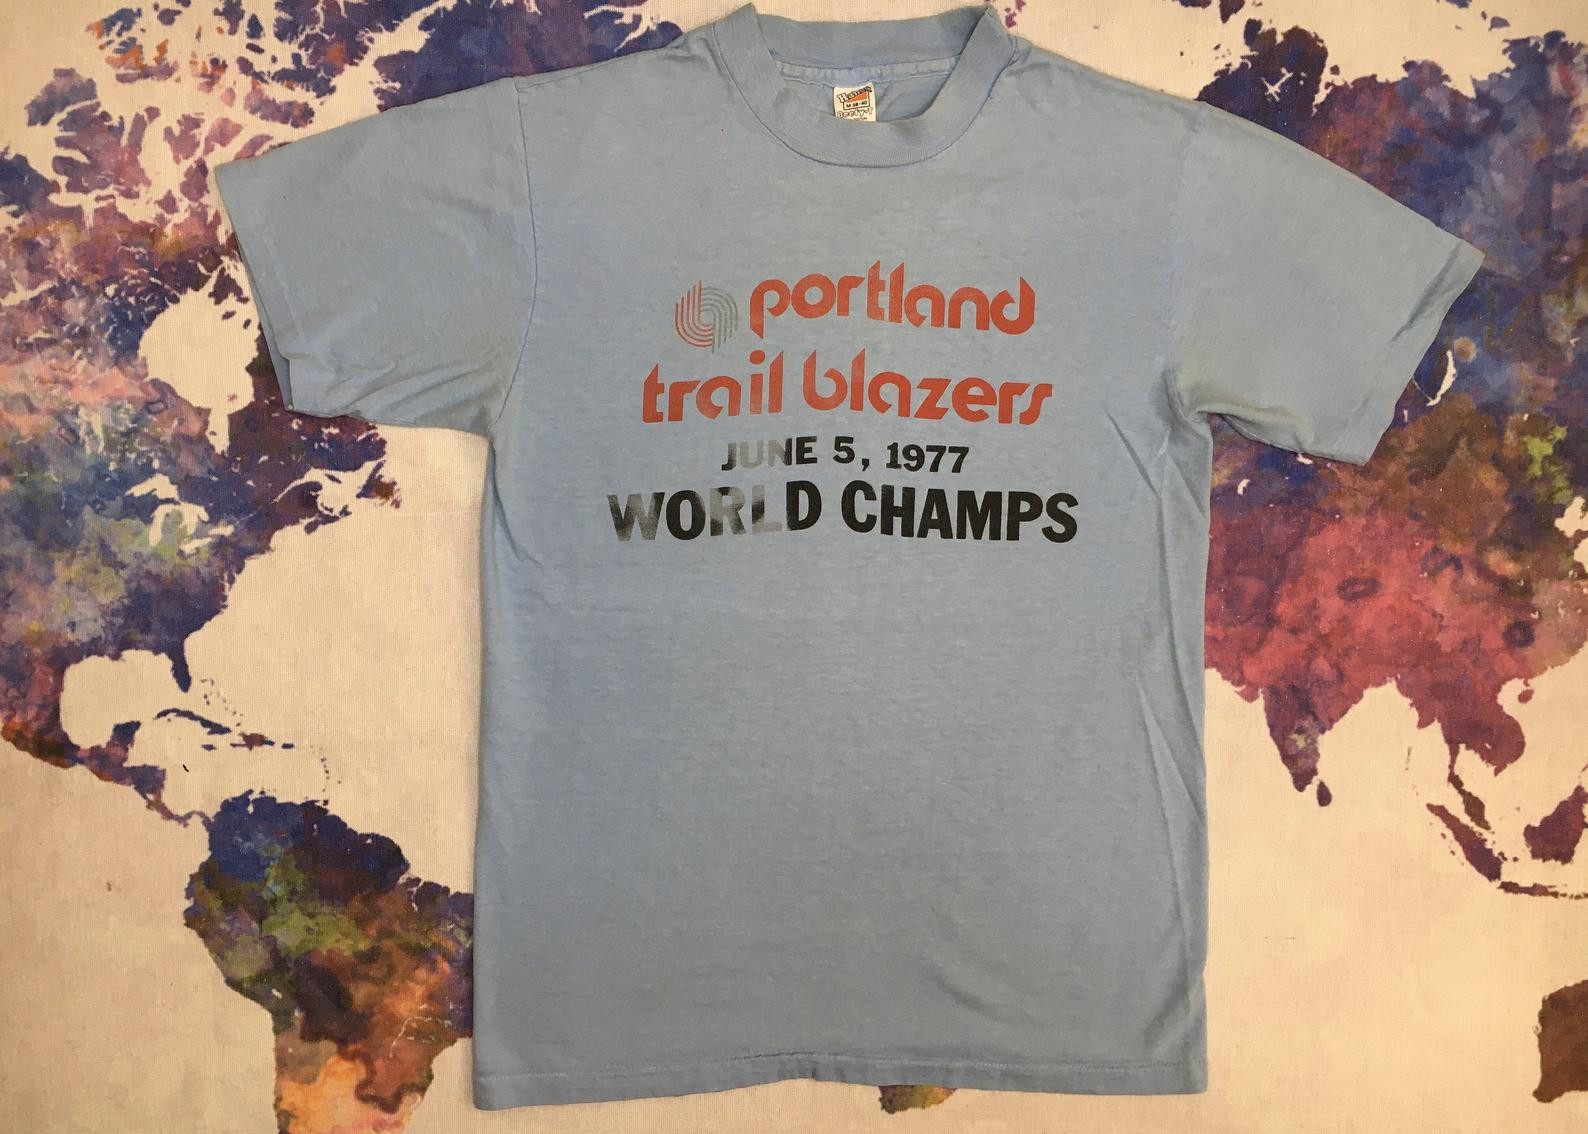 Vintage Blazers Shirt 1977/ 70’S Rip City Portland Trail Blazers Champions Tshirt/ Text Graphic Front Back Roster